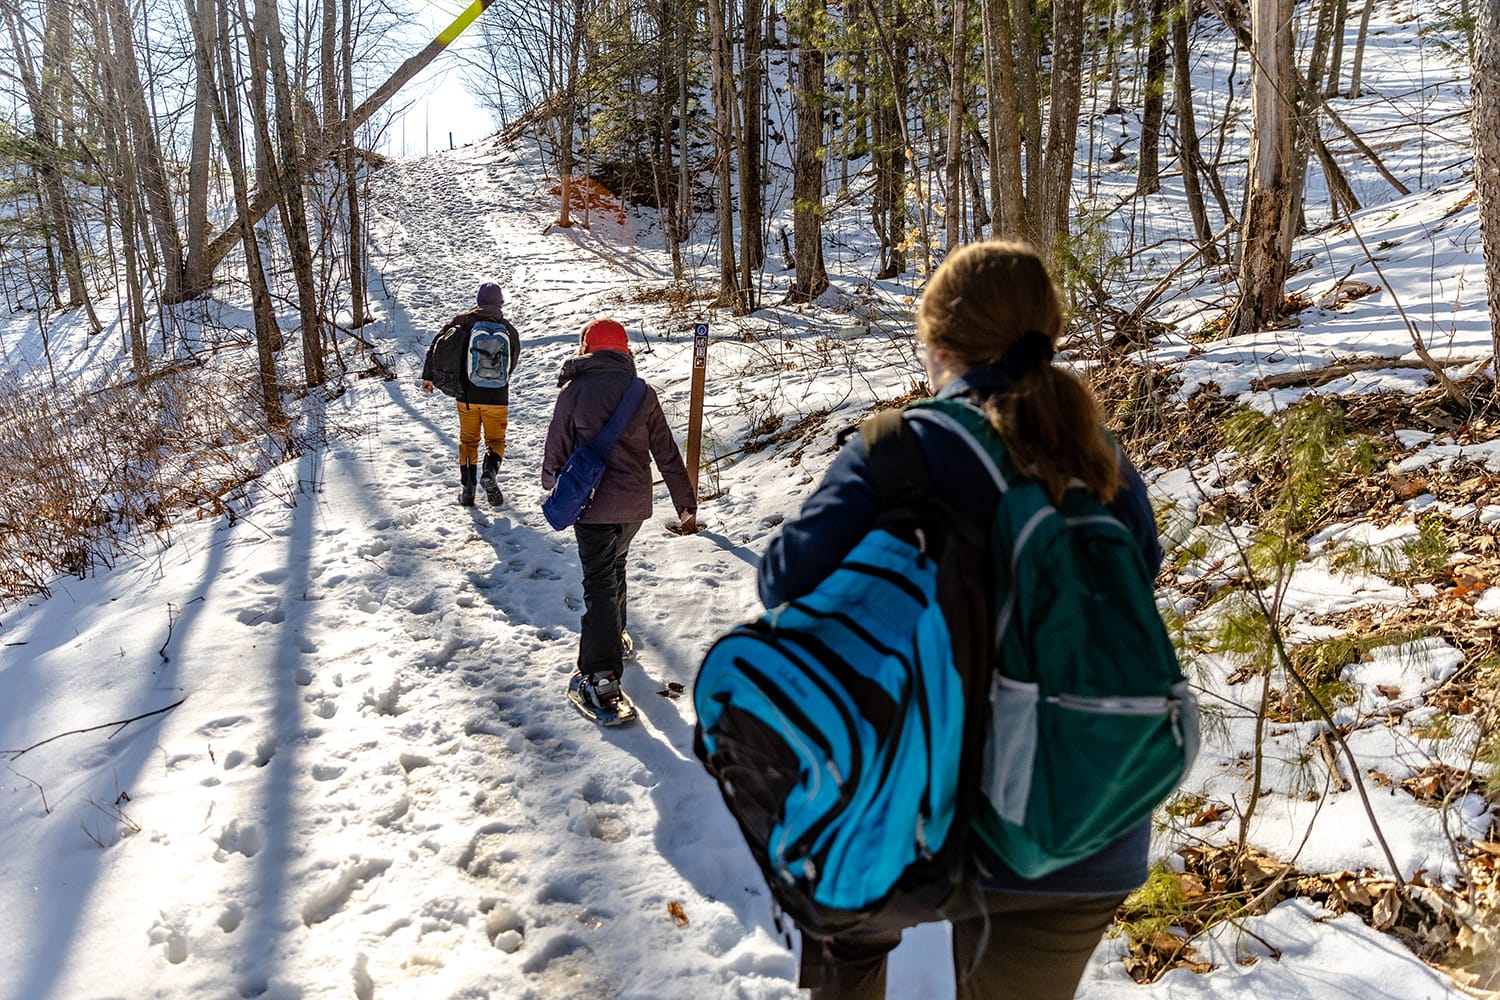 After collecting the cameras, students head back up a snowy hill in the Natural Area on Feb. 13.